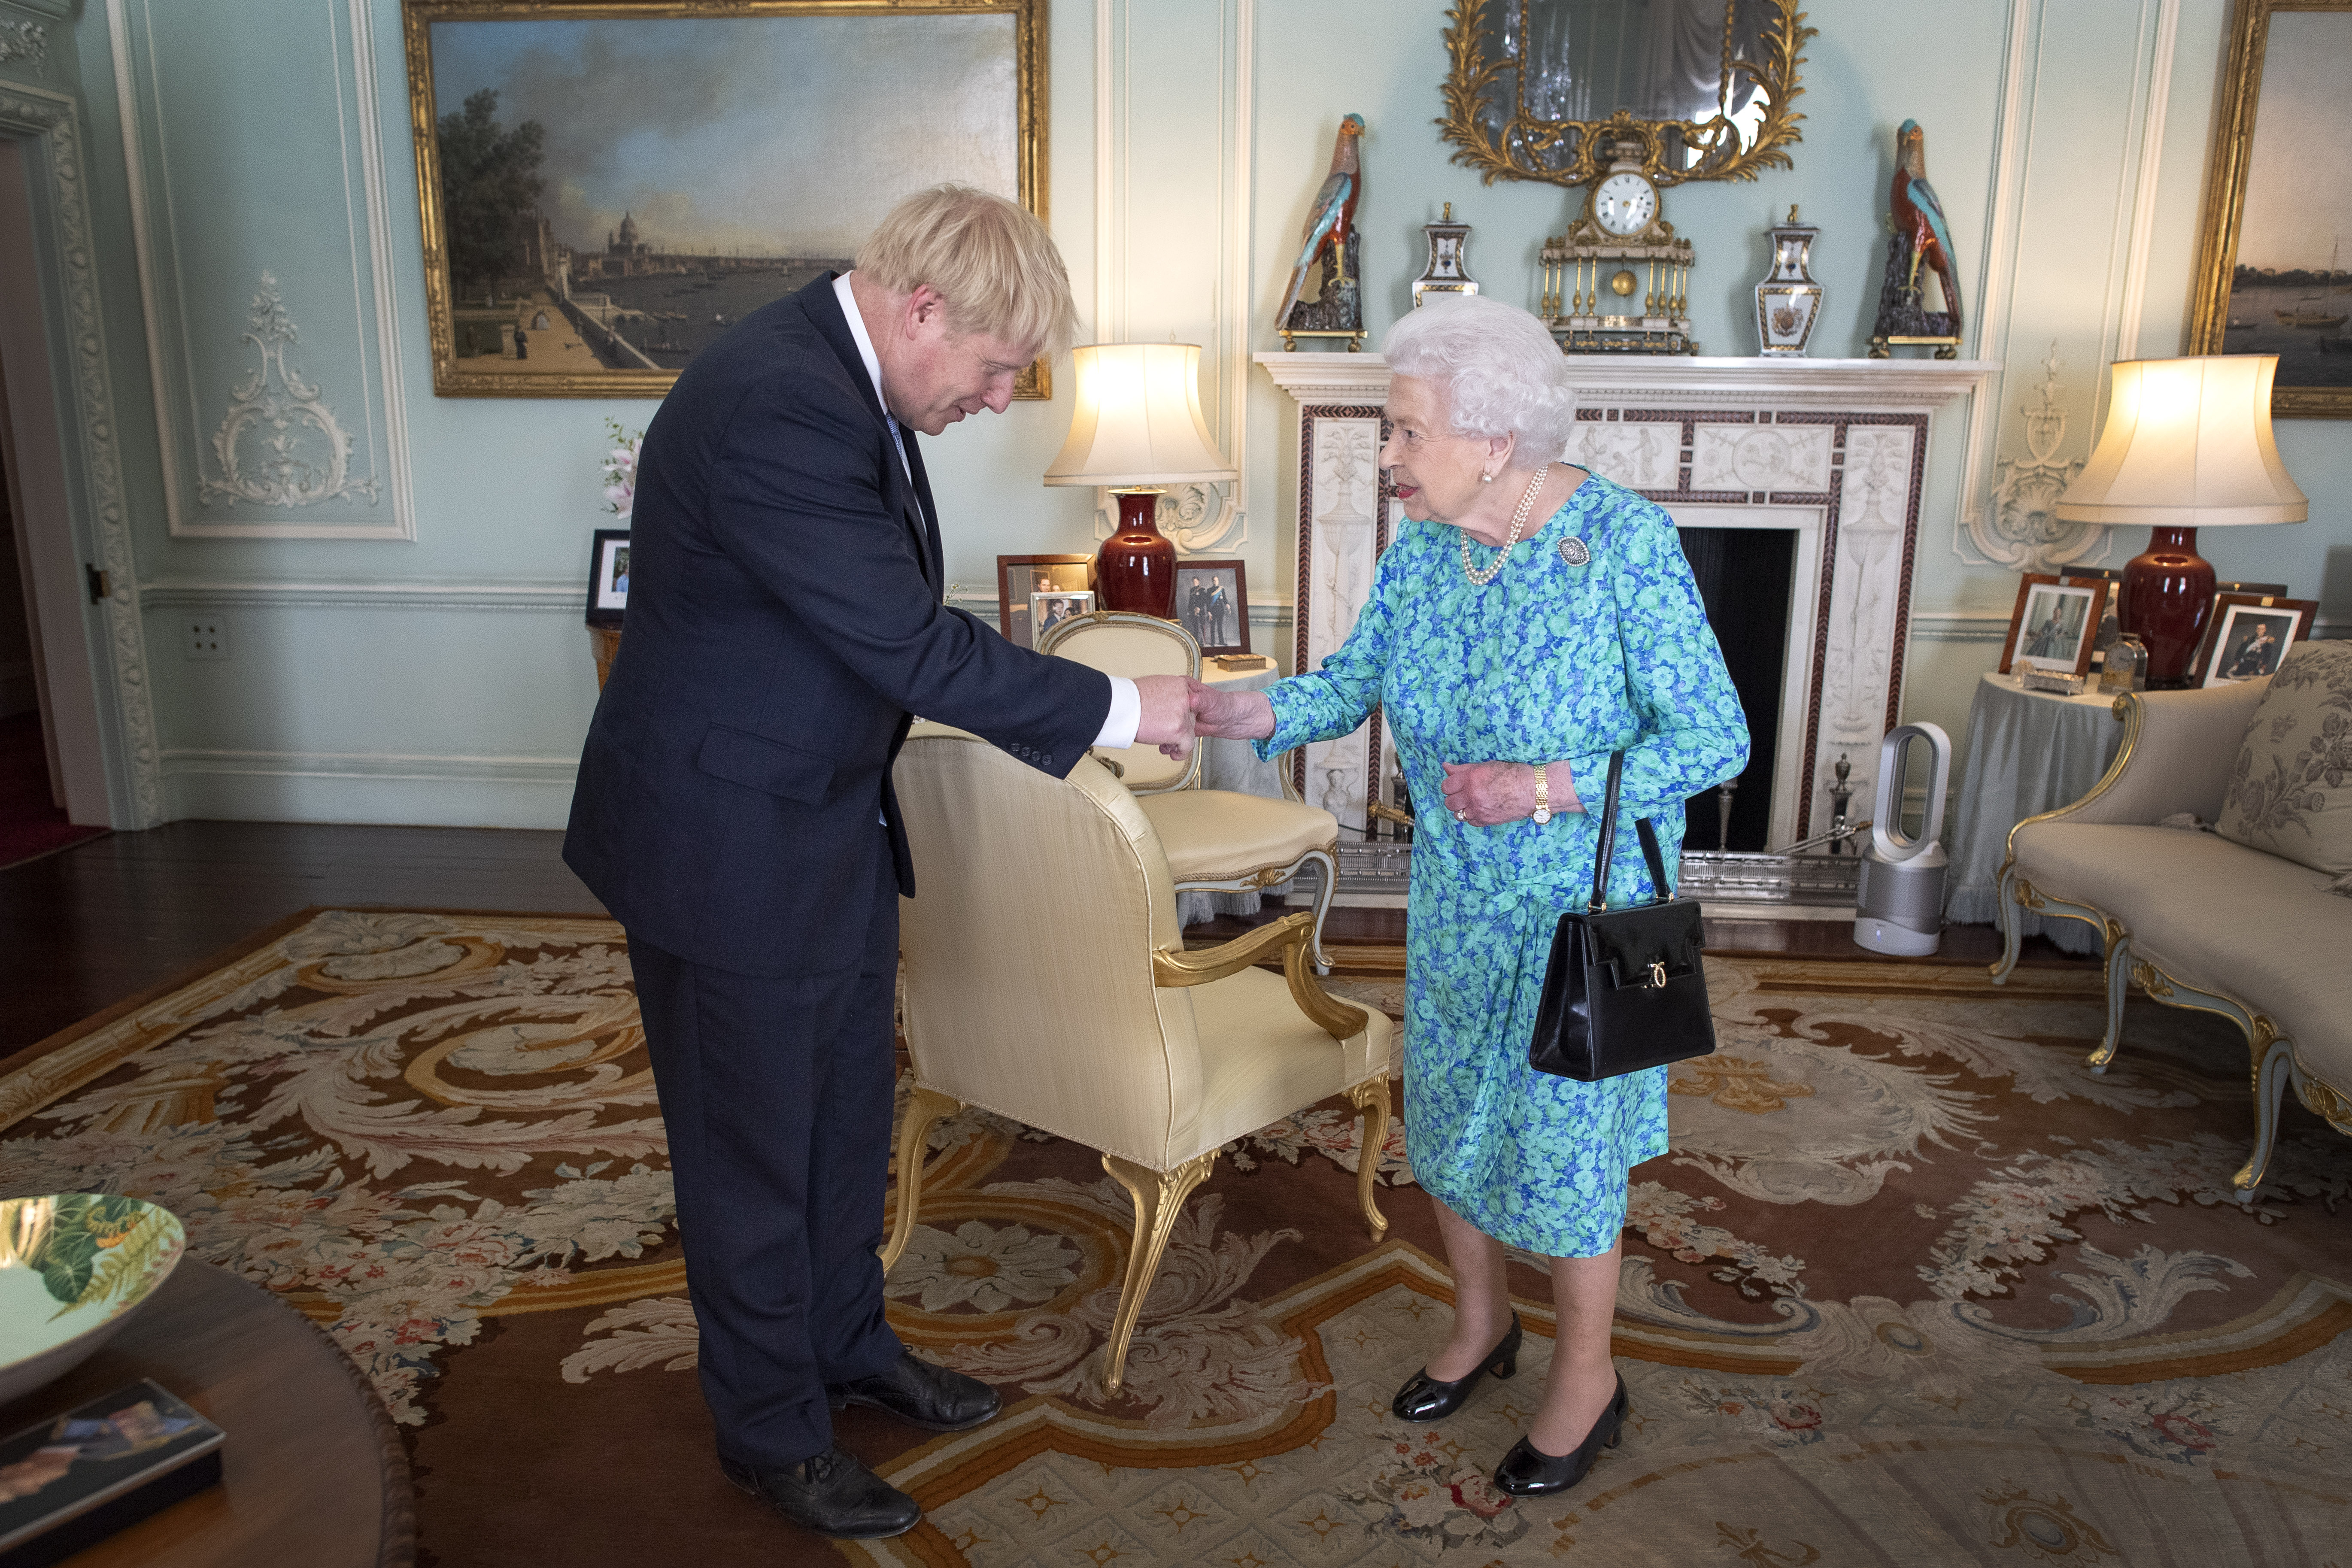 The Queen, Boris and Brexit: Who is really the most powerful of them all?